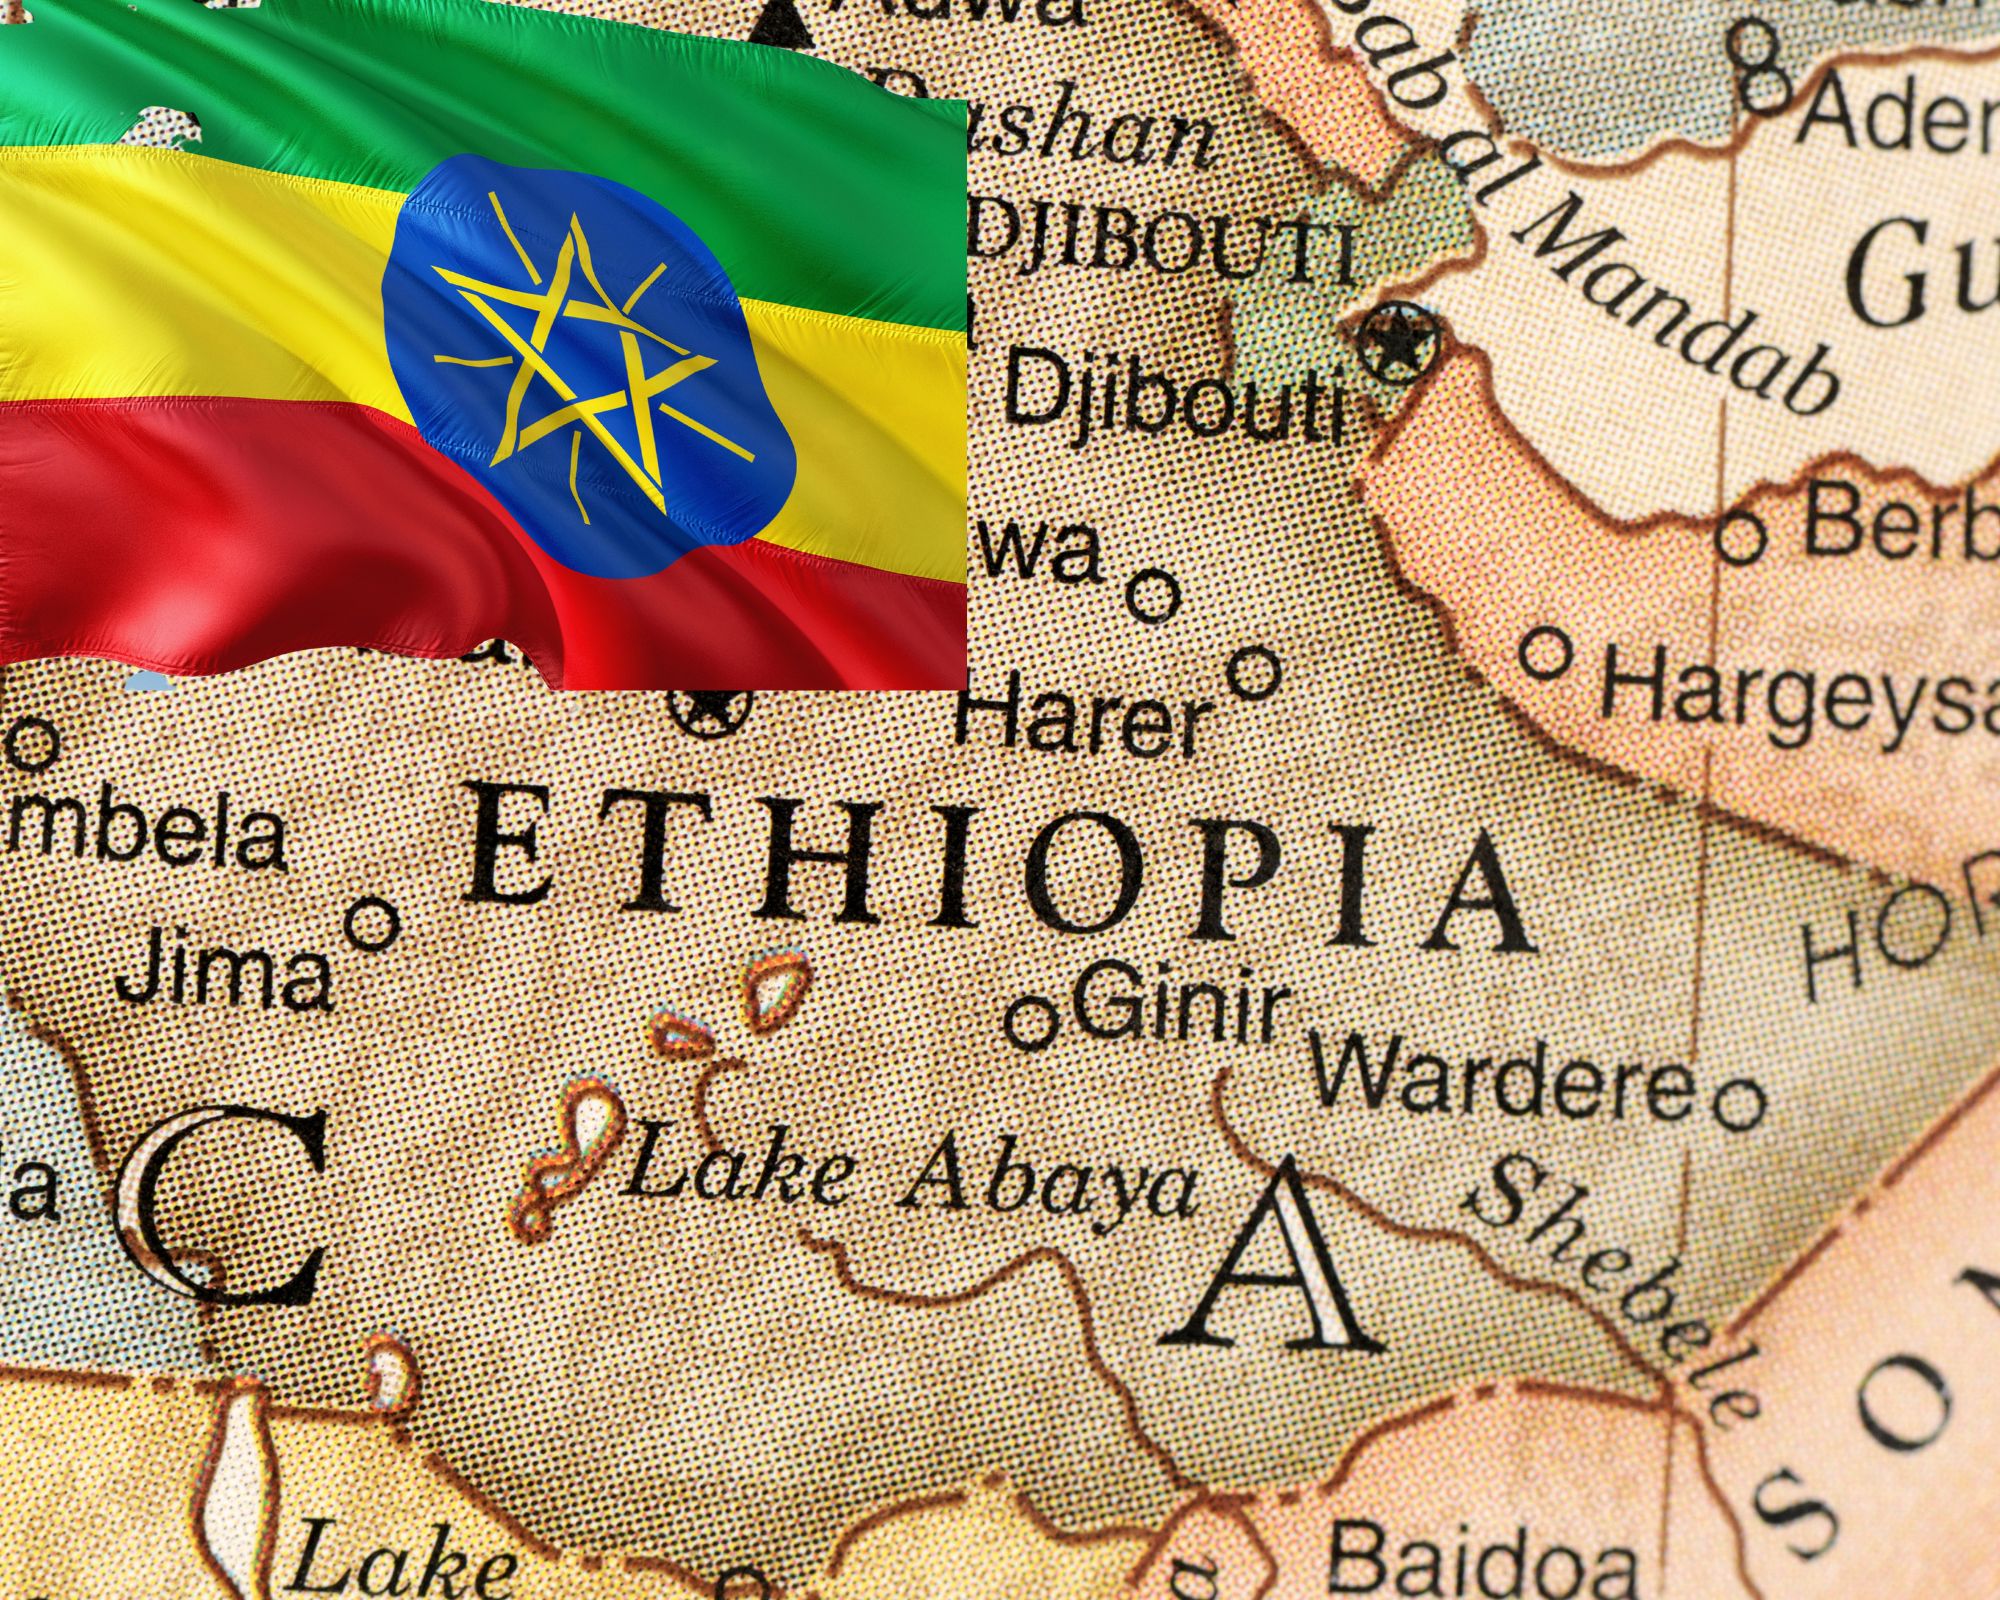 Ethiopia: As the situation worsens, worries of more atrocities loom in Tigray